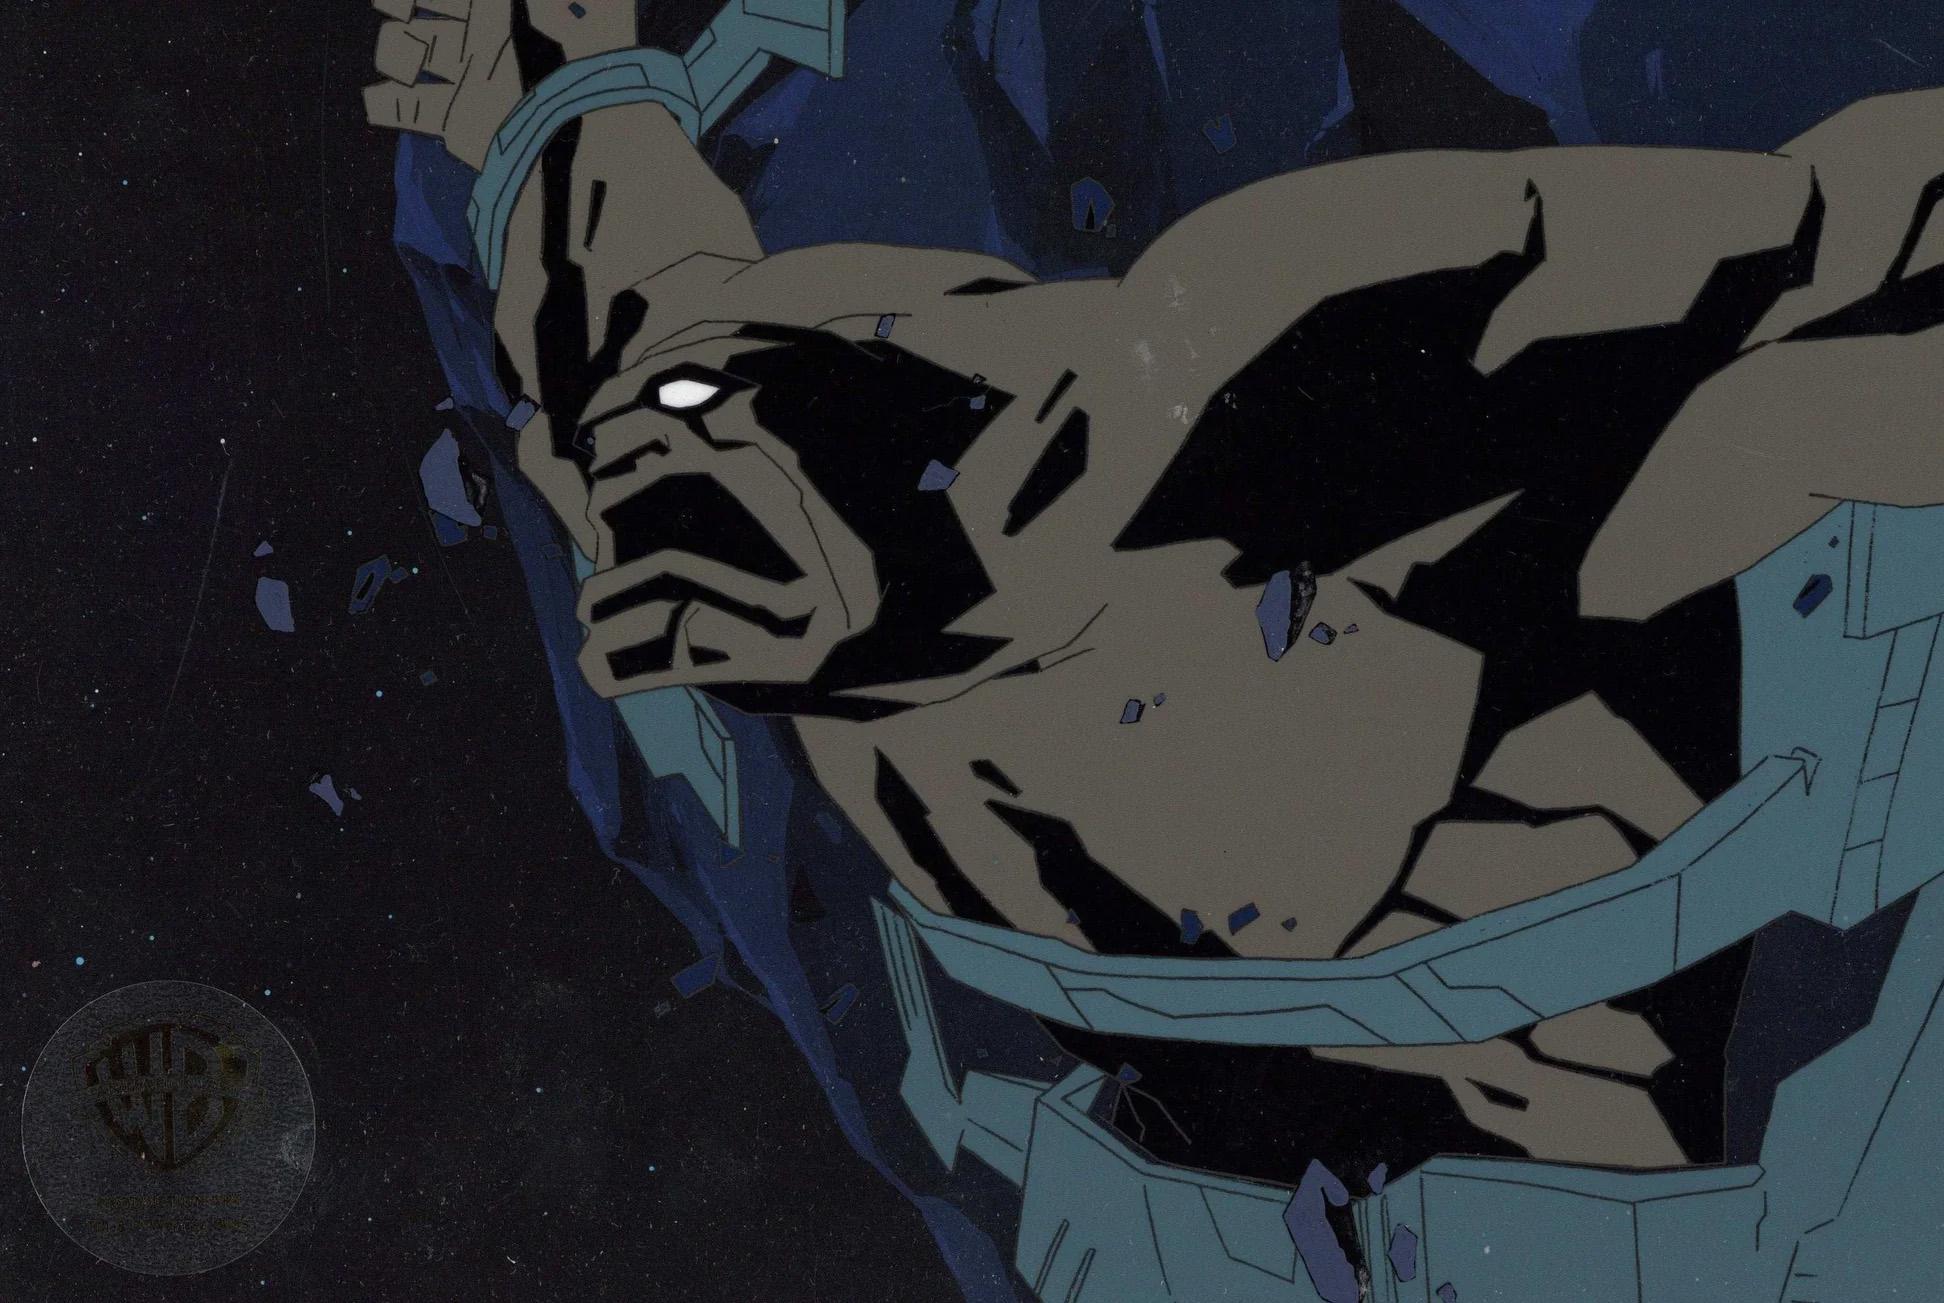 Superman the Animated Series Original Cel and Background: The Creature - Art by DC Comics Studio Artists